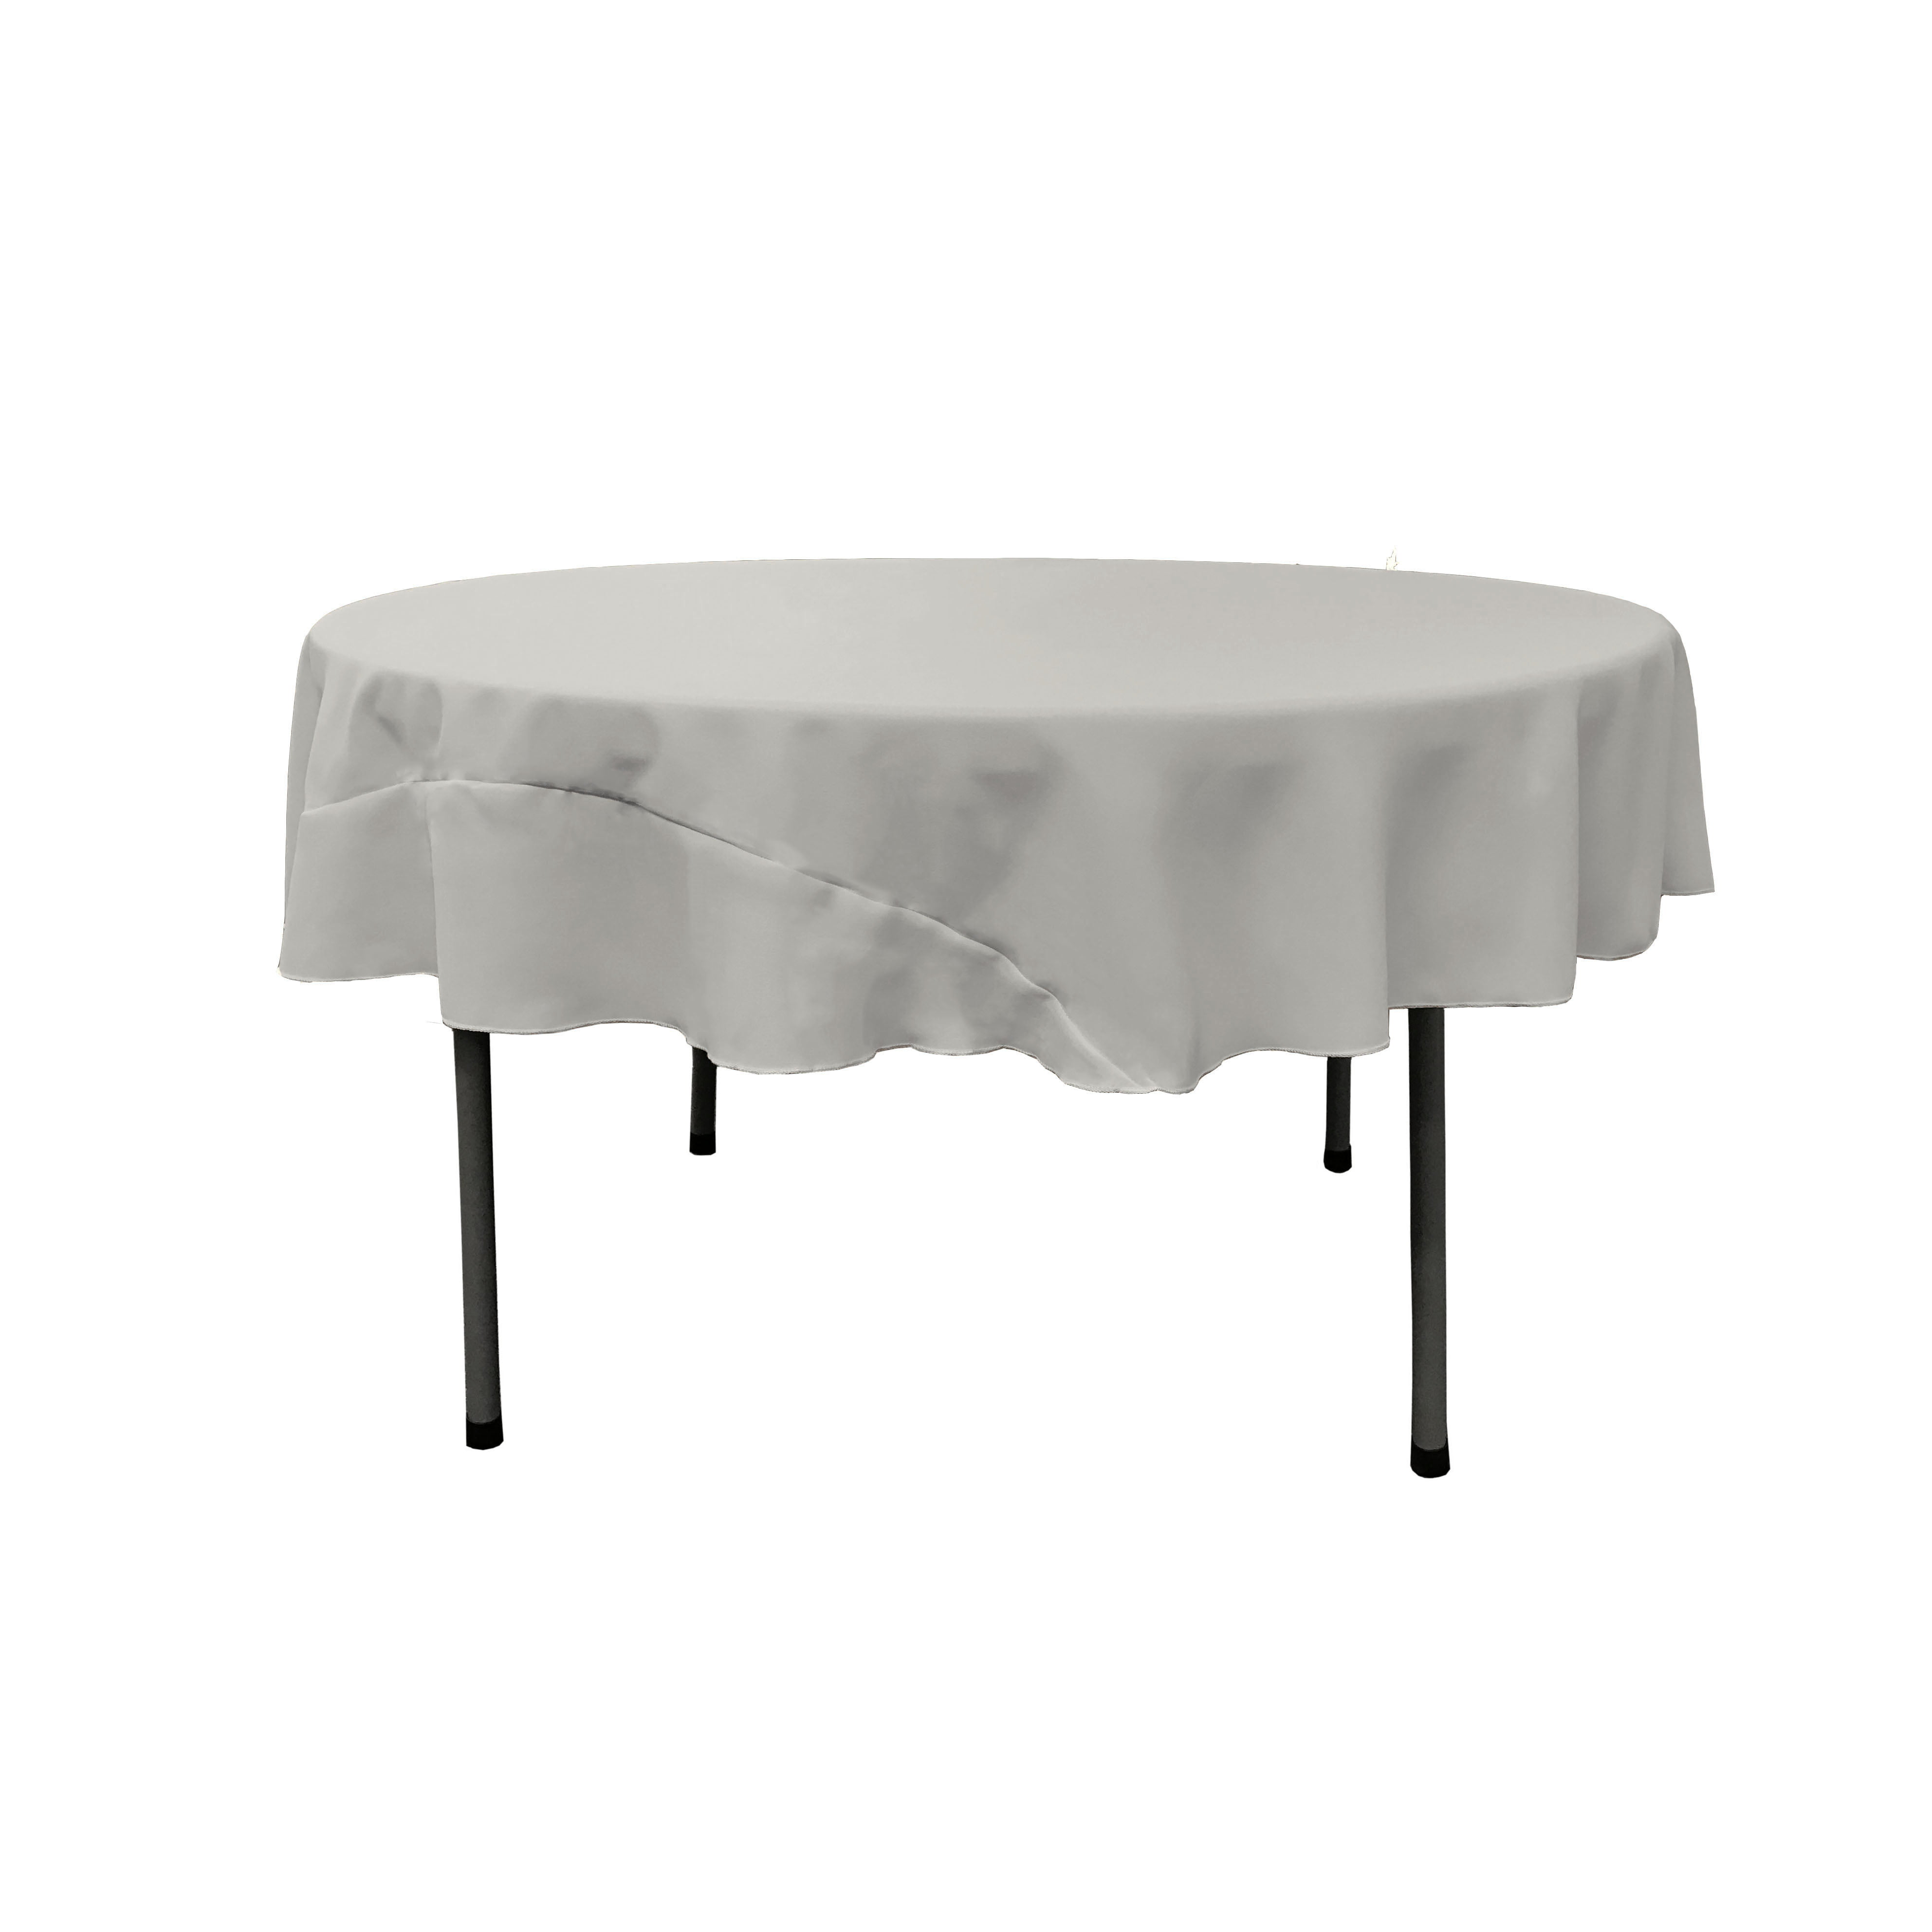 La Linen Polyester Poplin Tablecloth 72, What Size Linen Do I Need For A 72 Round Table